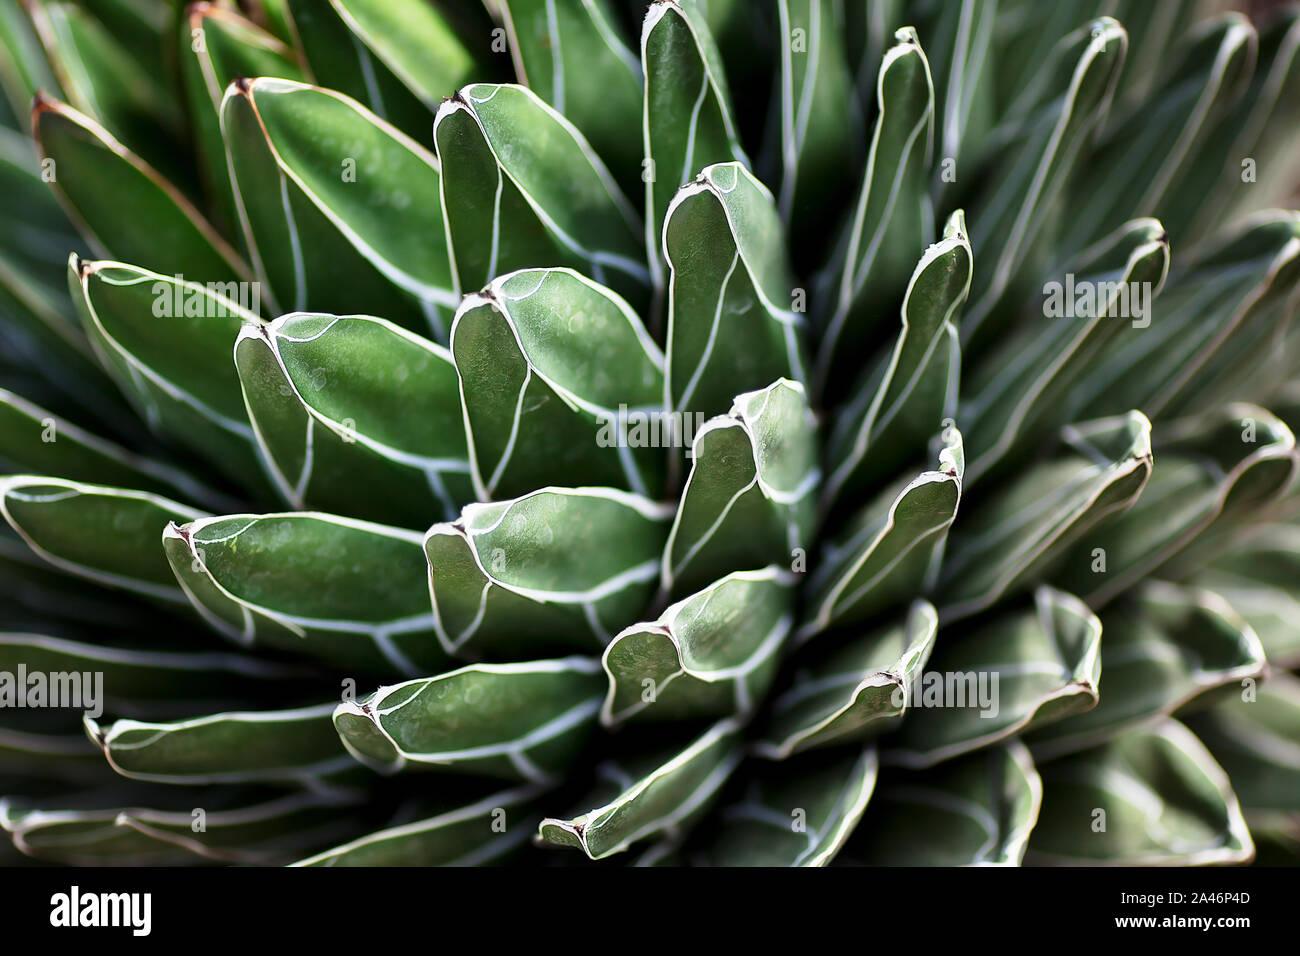 A close-up image of Queen Victoria agave (royal agave) plant Stock Photo